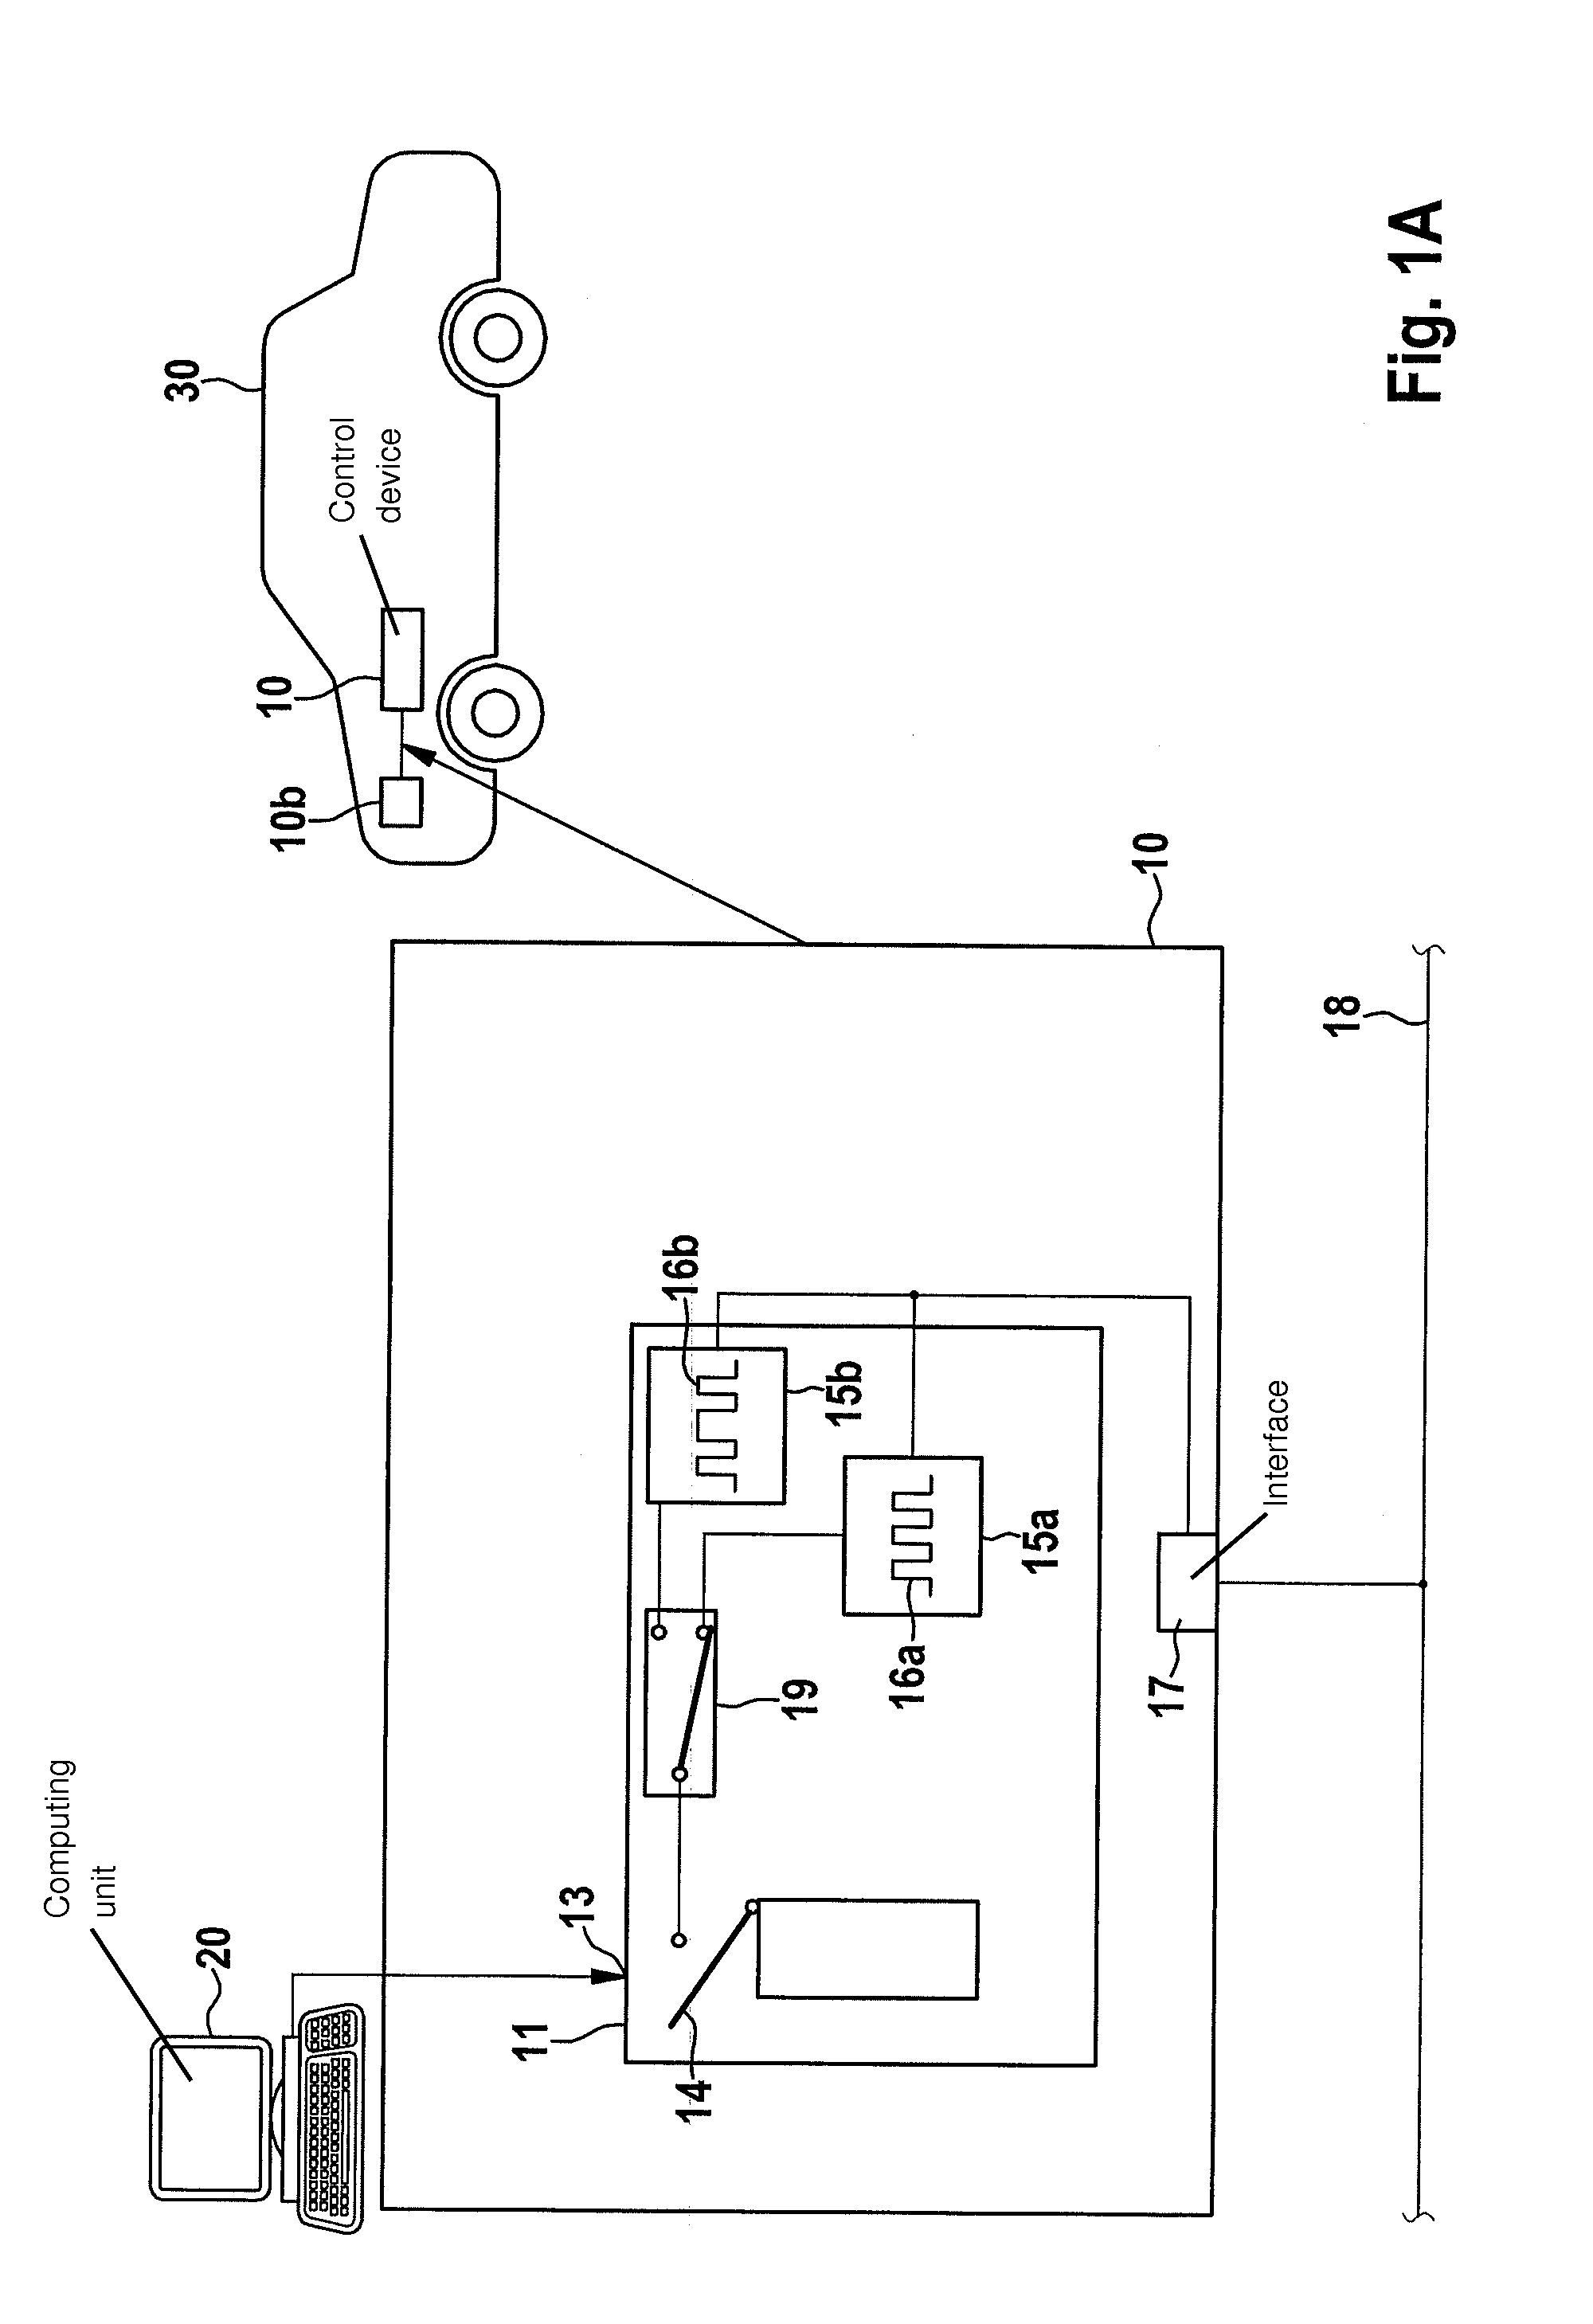 Active functional limiting of a microcontroller